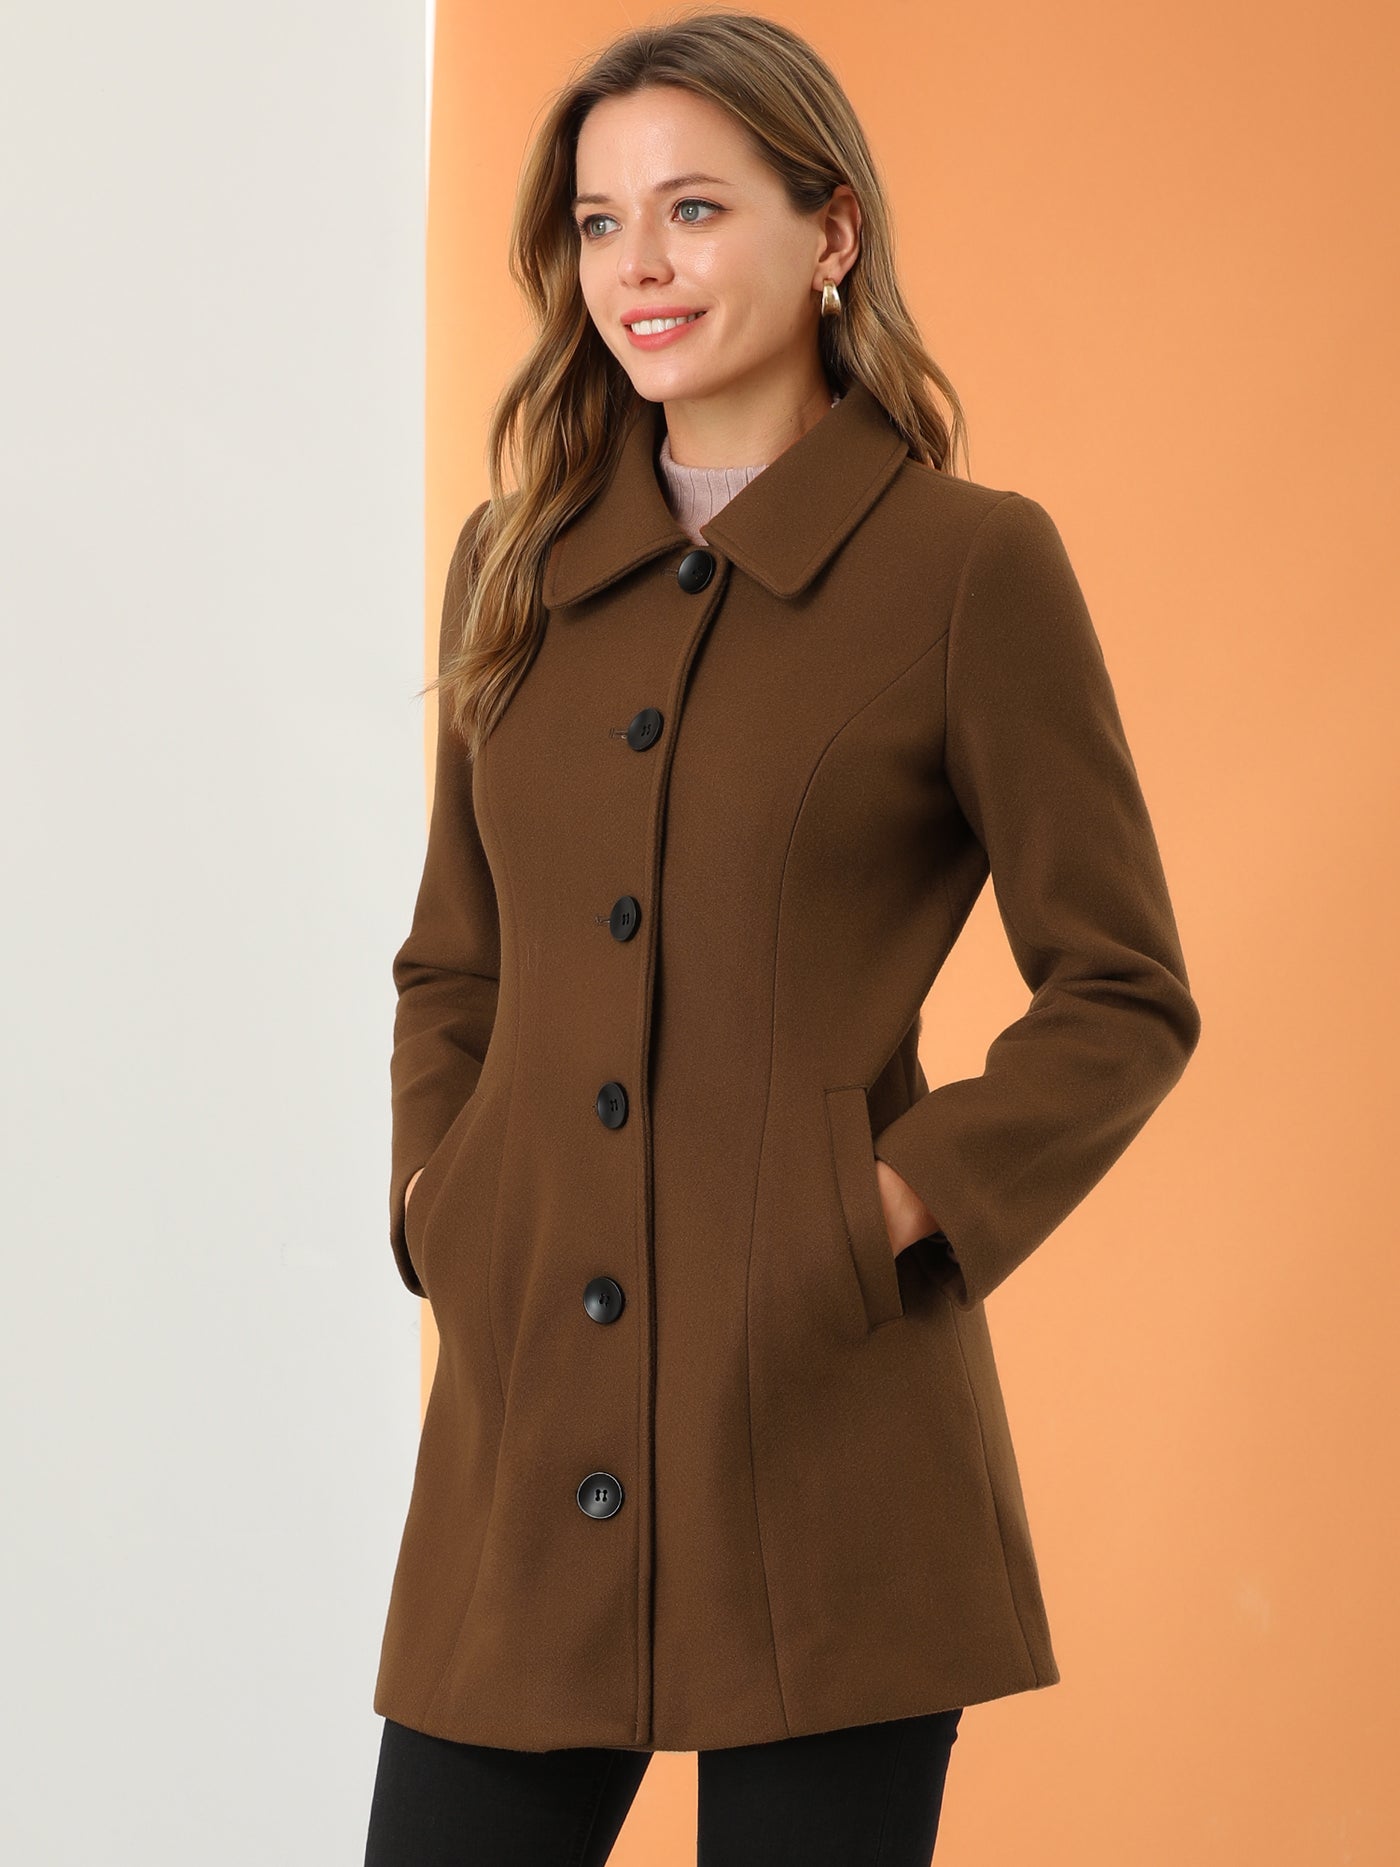 Allegra K Solid Winter Single Breasted Long Warm Pocketed Pea Coat